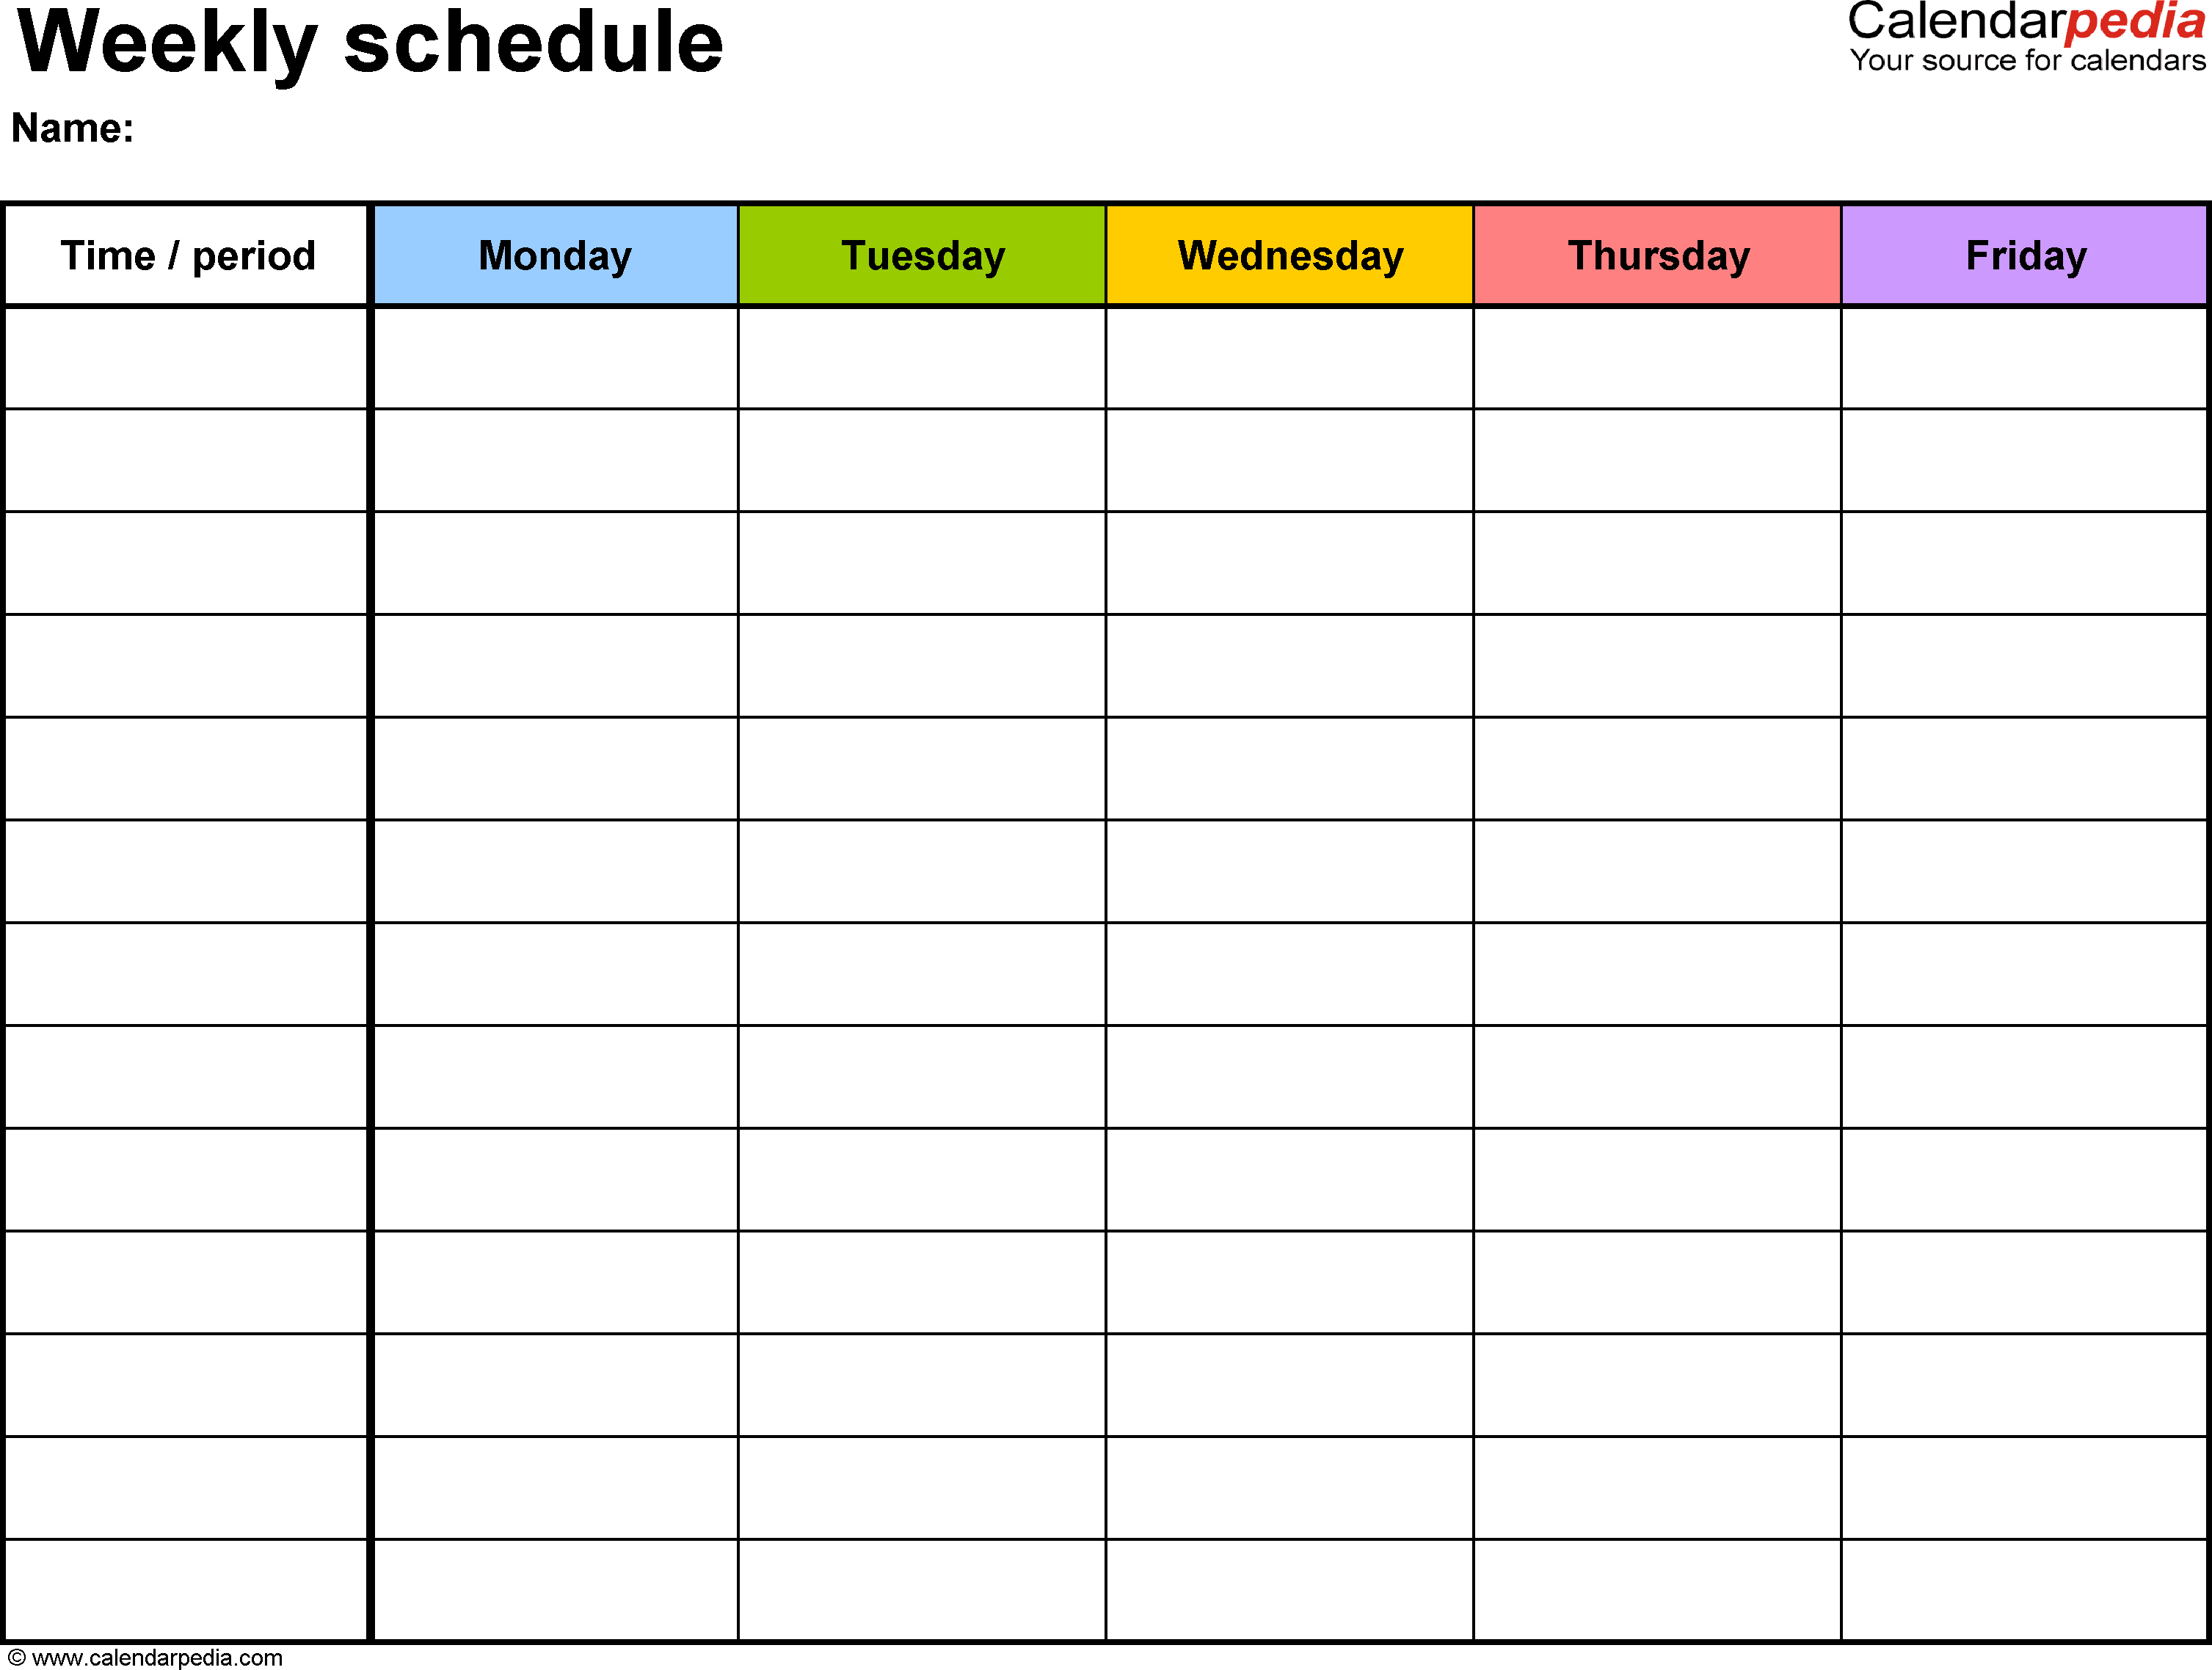 Free Weekly Schedule Templates For Pdf - 18 Templates